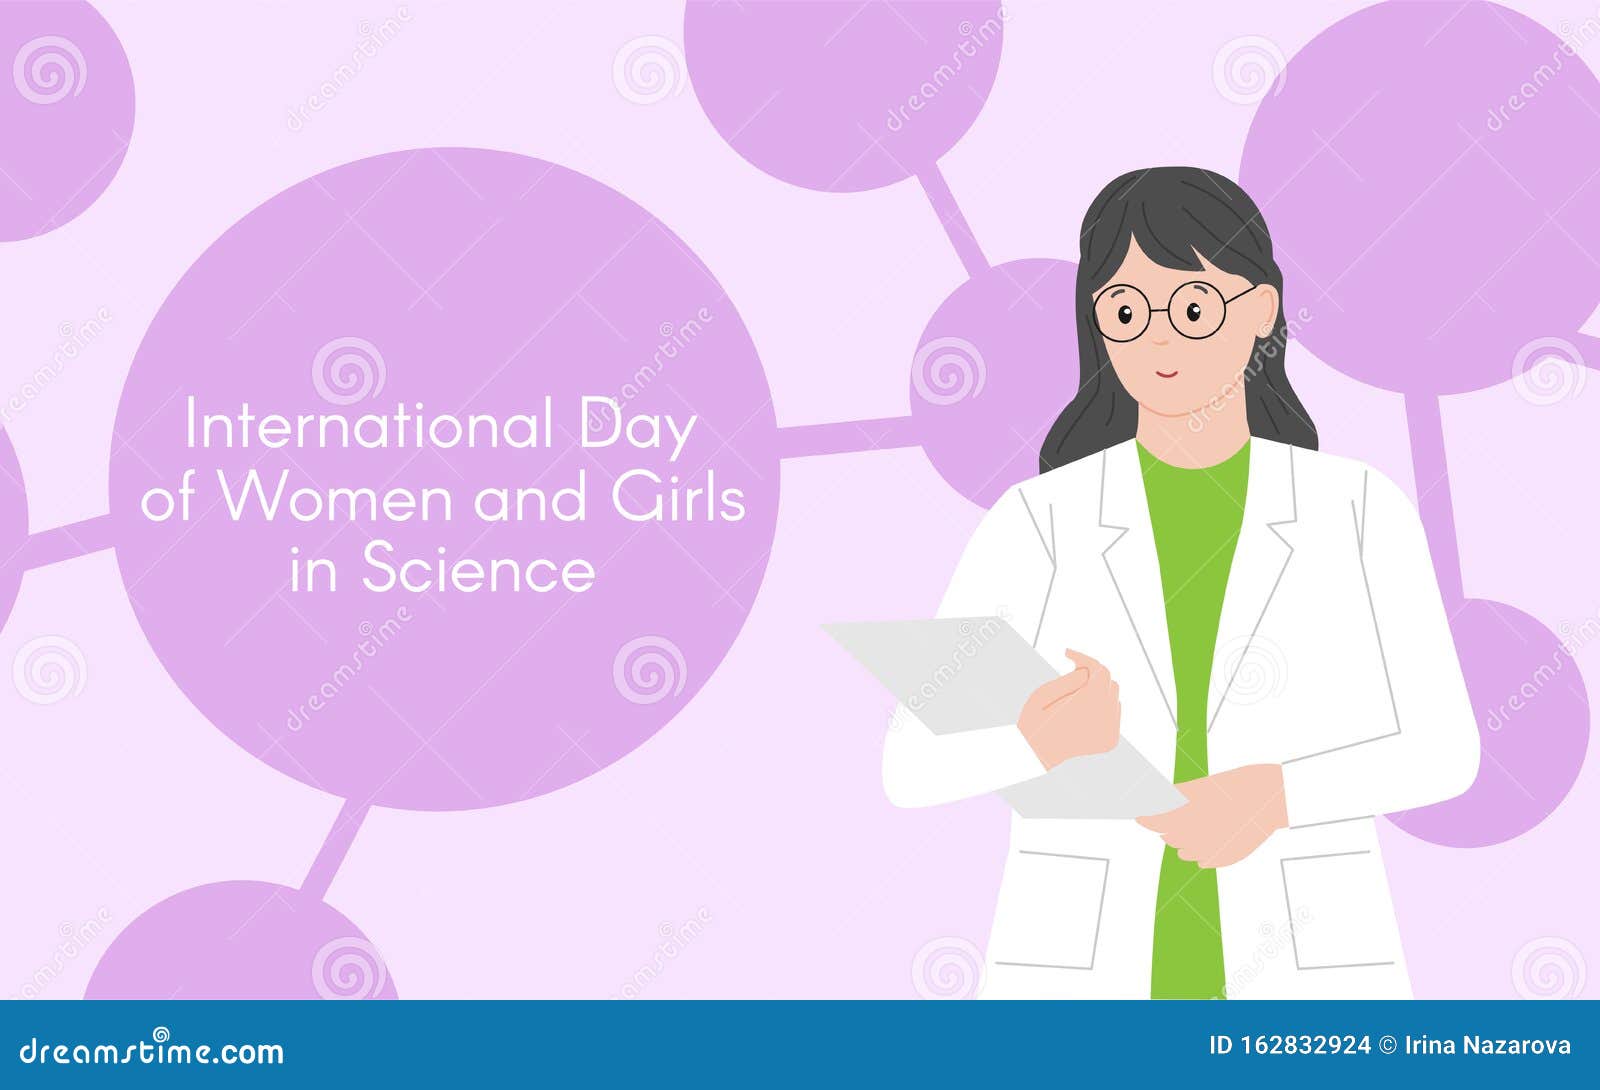 woman chemist with a folder. international day of women and girls in science. woman chemist. woman scientist.flat style. abstract